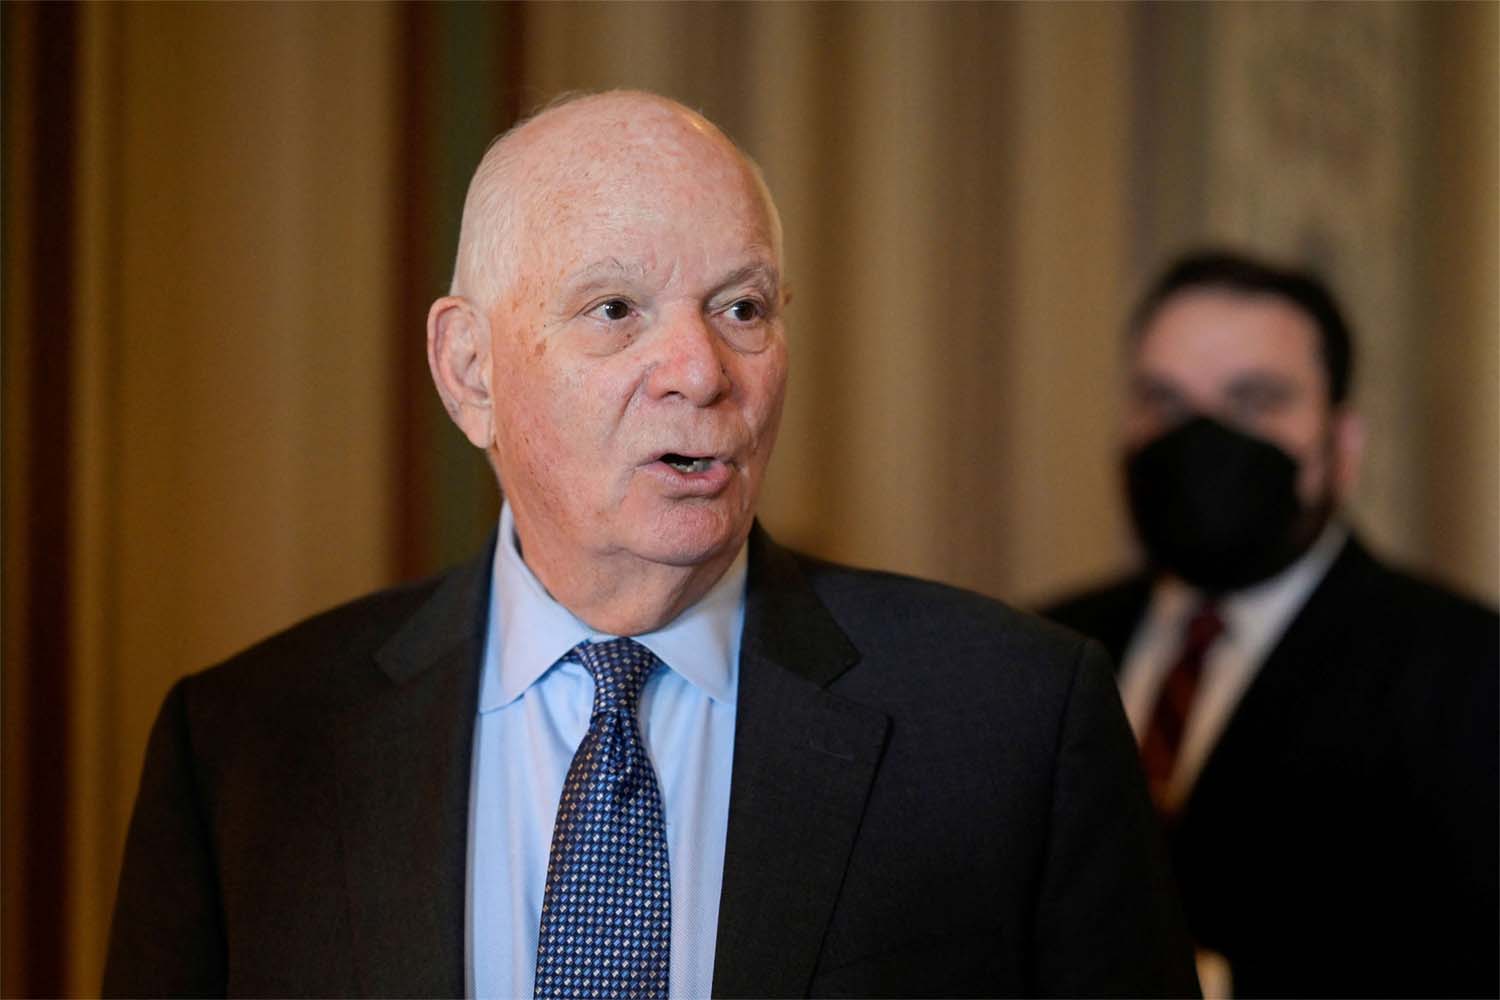 Ben Cardin said a hold on current funds will remain until Egypt makes progress on human rights issues